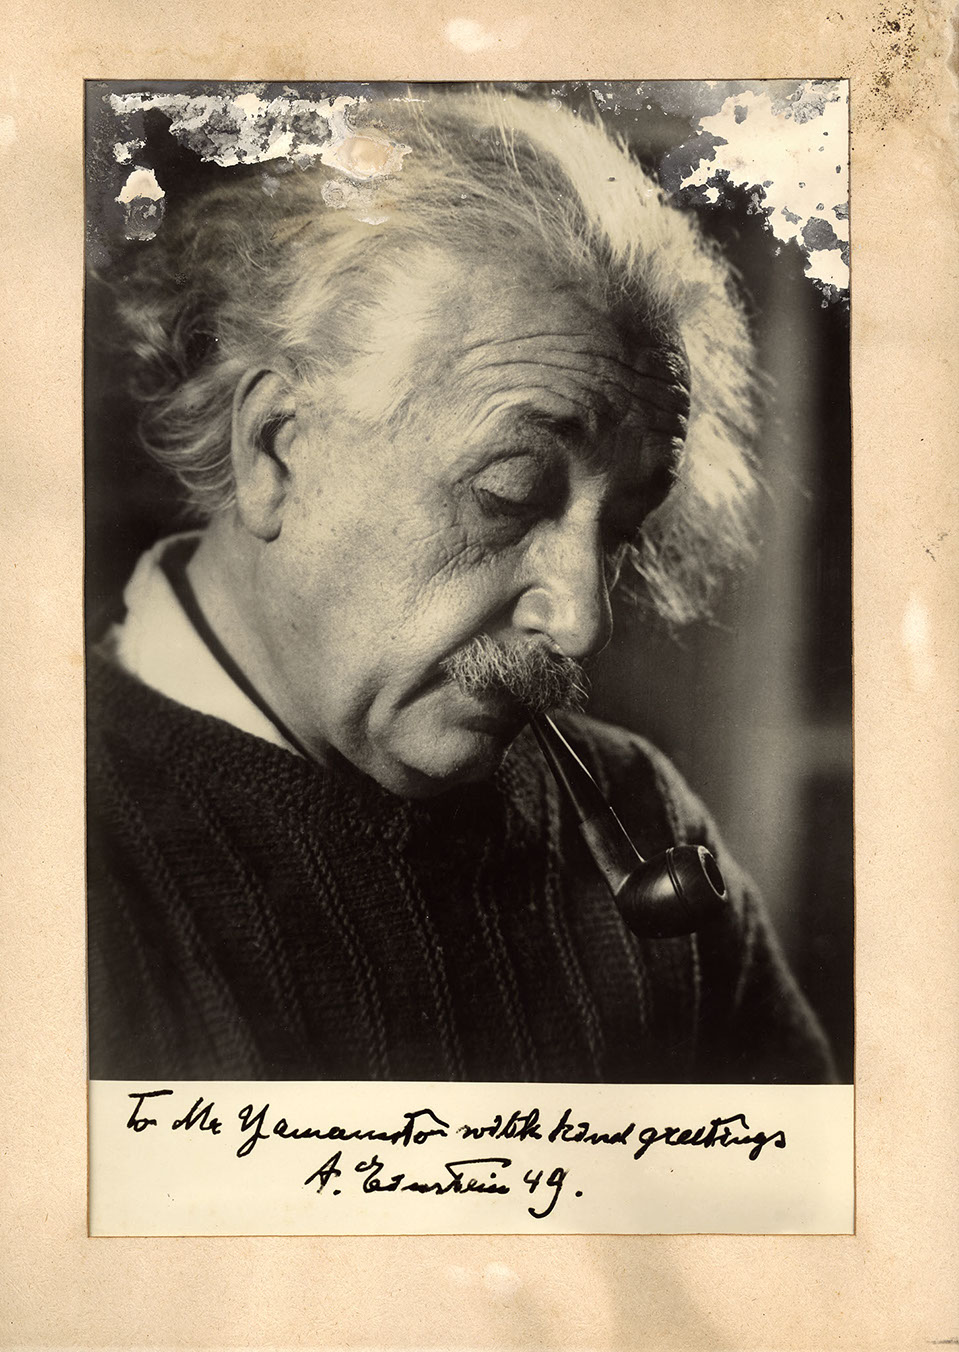 This is a photograph portrait of Albert Einstein smoking a pipe and looking away from the camera. Below the photo, it is signed for Yamamoto. 